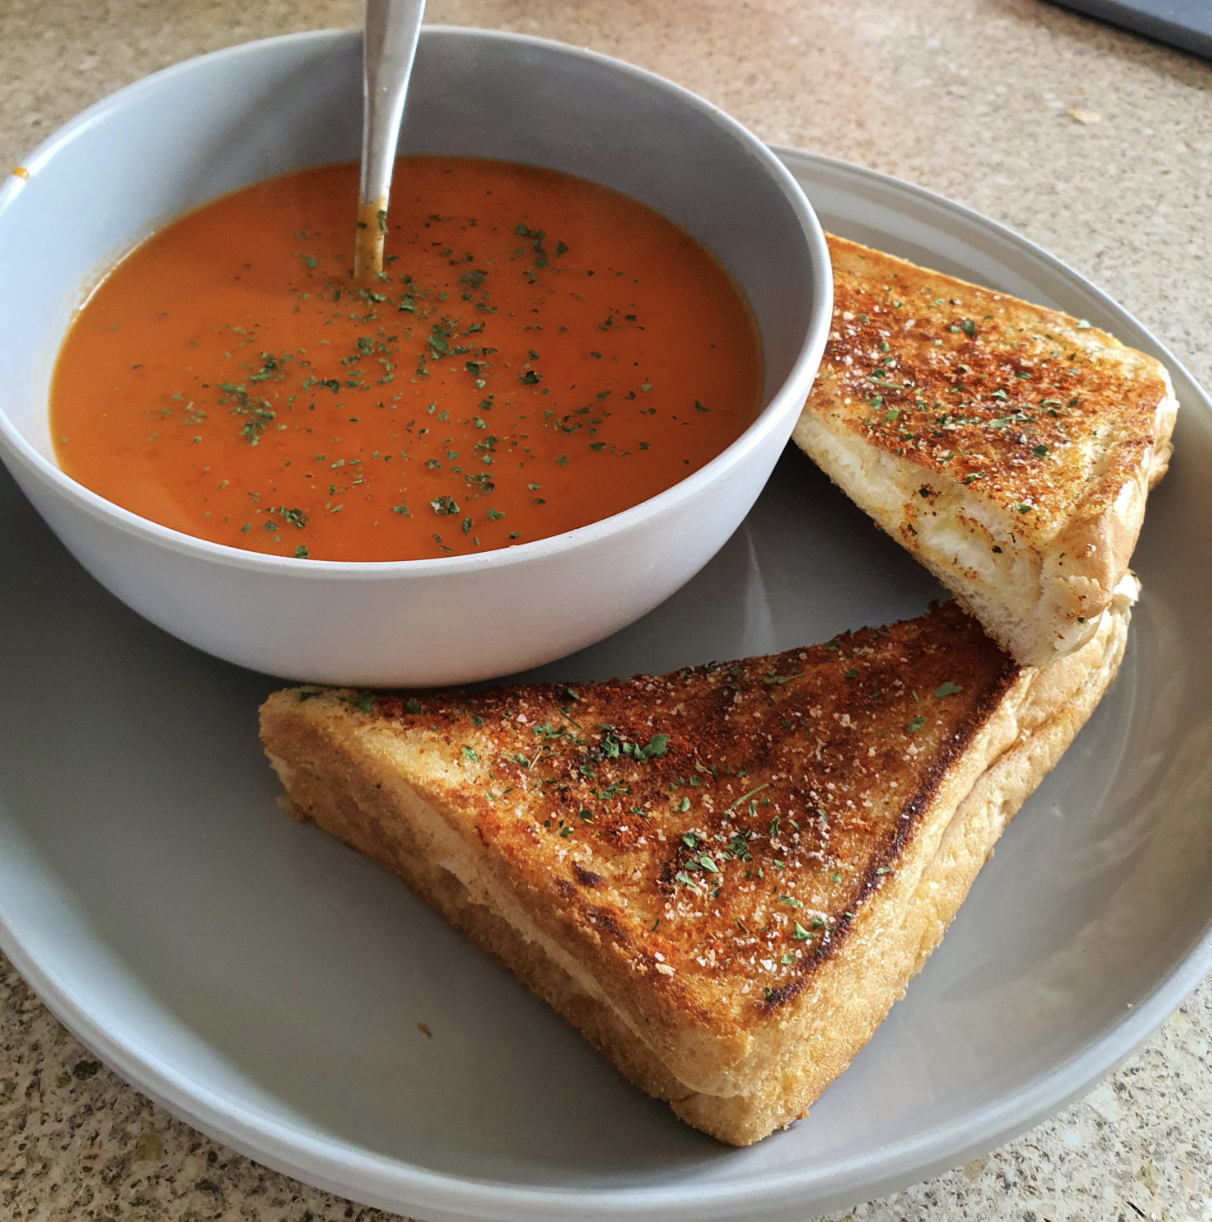 Grilled cheese sandwich and tomato soup